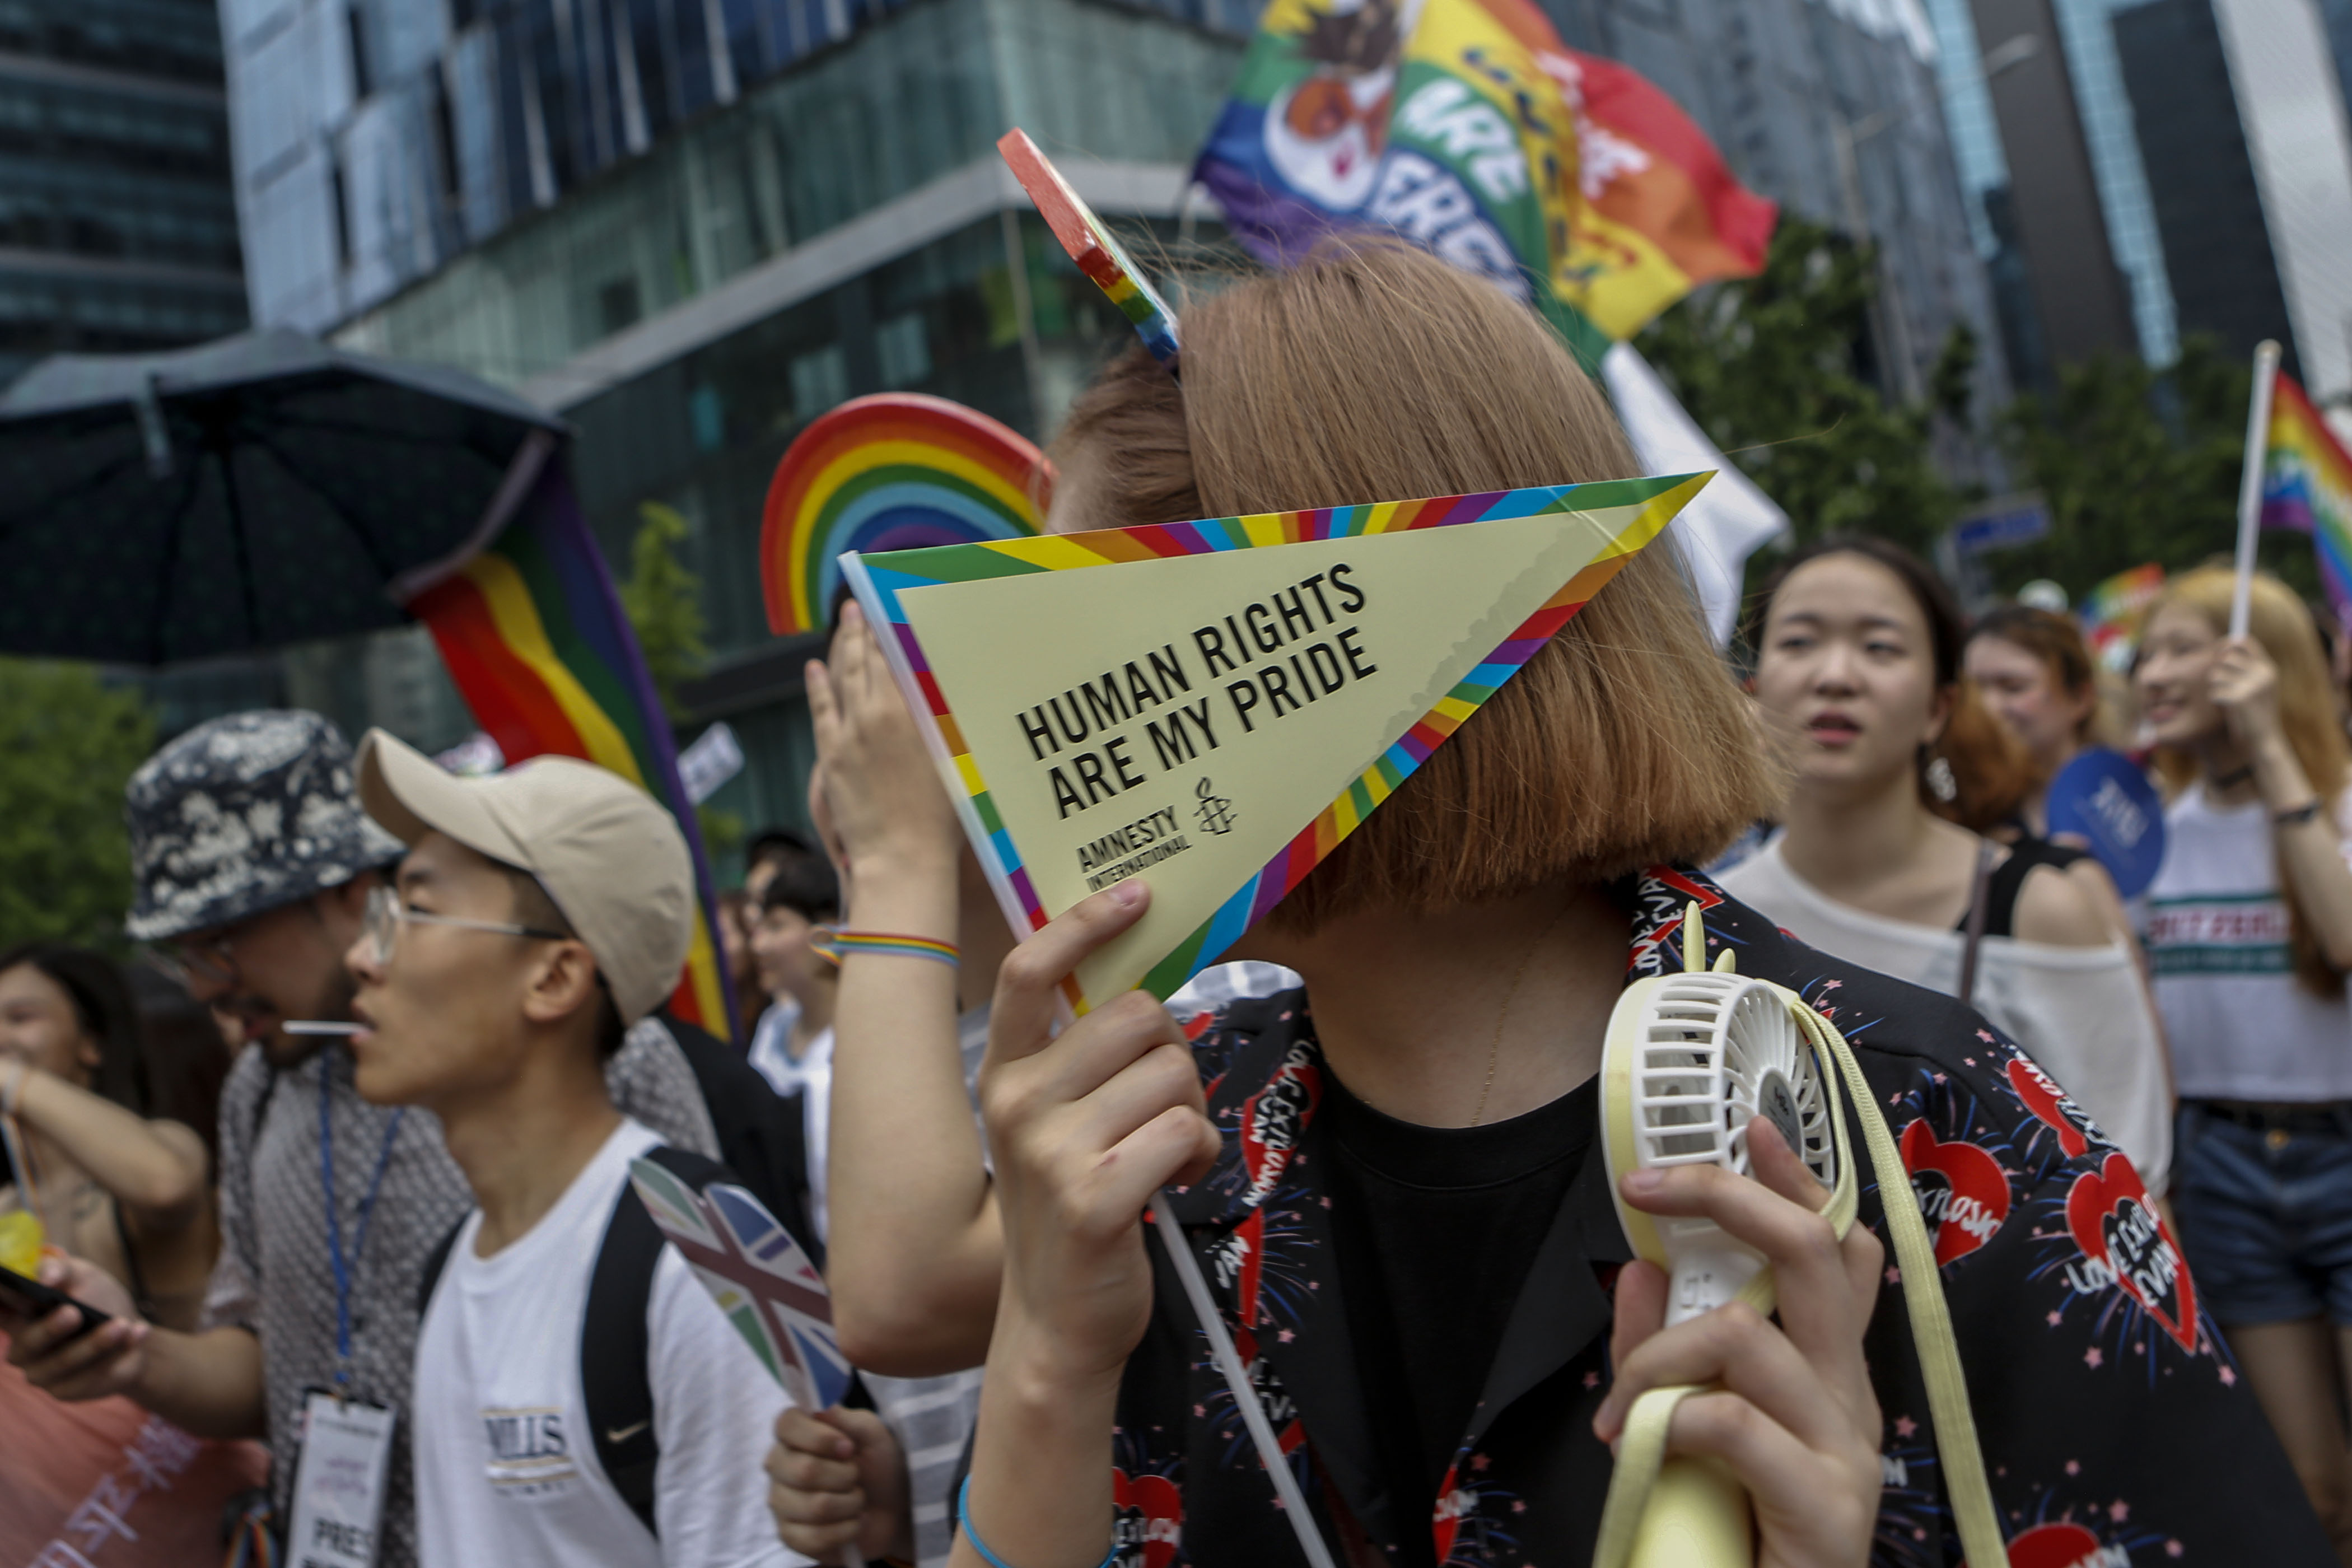 LGBT Group members in a marching parade during an LGBT rally near square in Seoul, South Korea, on 16 July 2017. (Seung-il Ryu—NurPhoto via Getty Images)